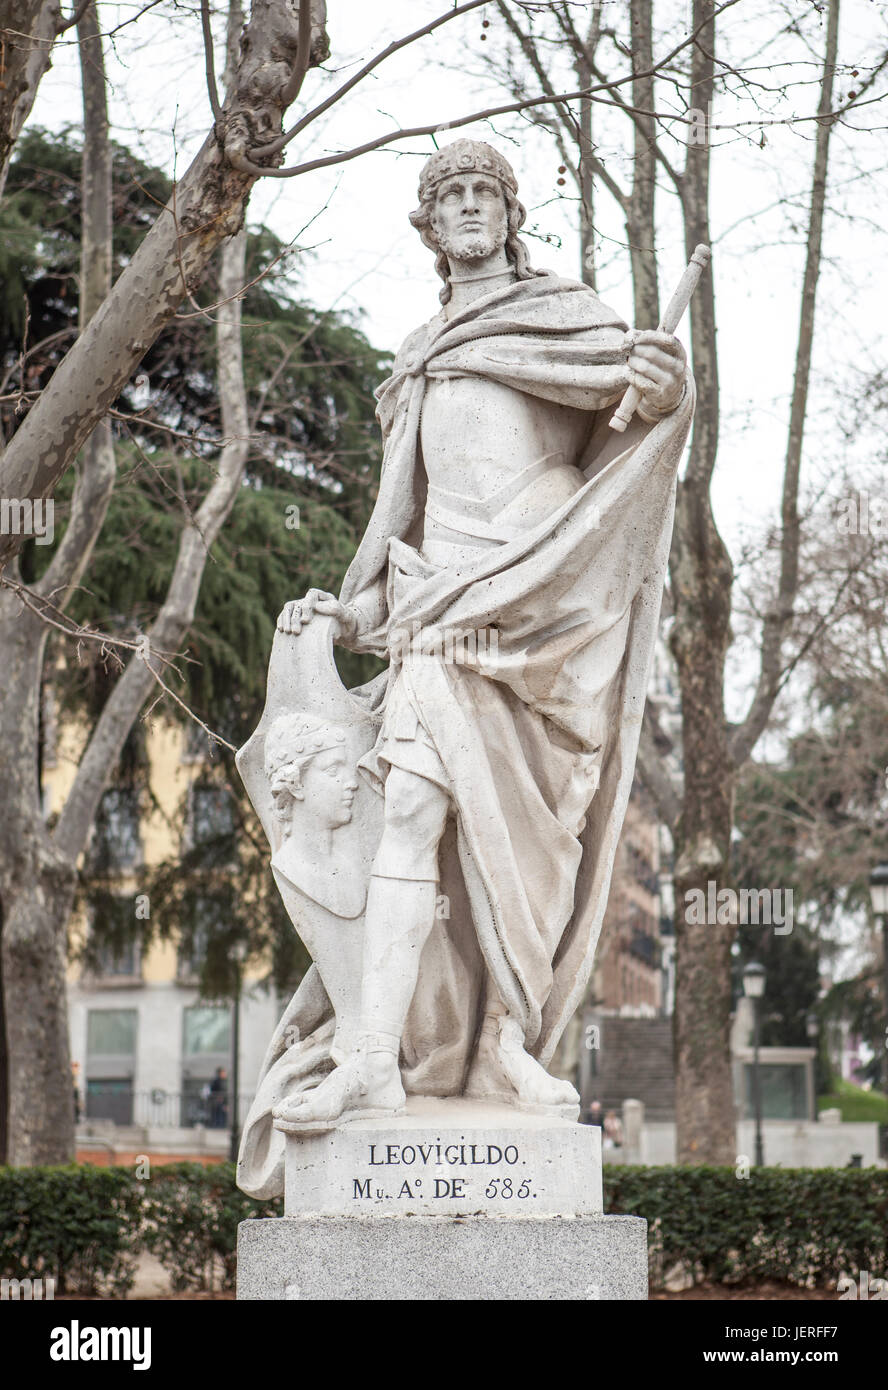 Madrid, Spain - february 26, 2017: Sculpture of Leovigild King at Plaza de Oriente, Madrid. He was a Visigothic King of Hispania and Septimania from 5 Stock Photo